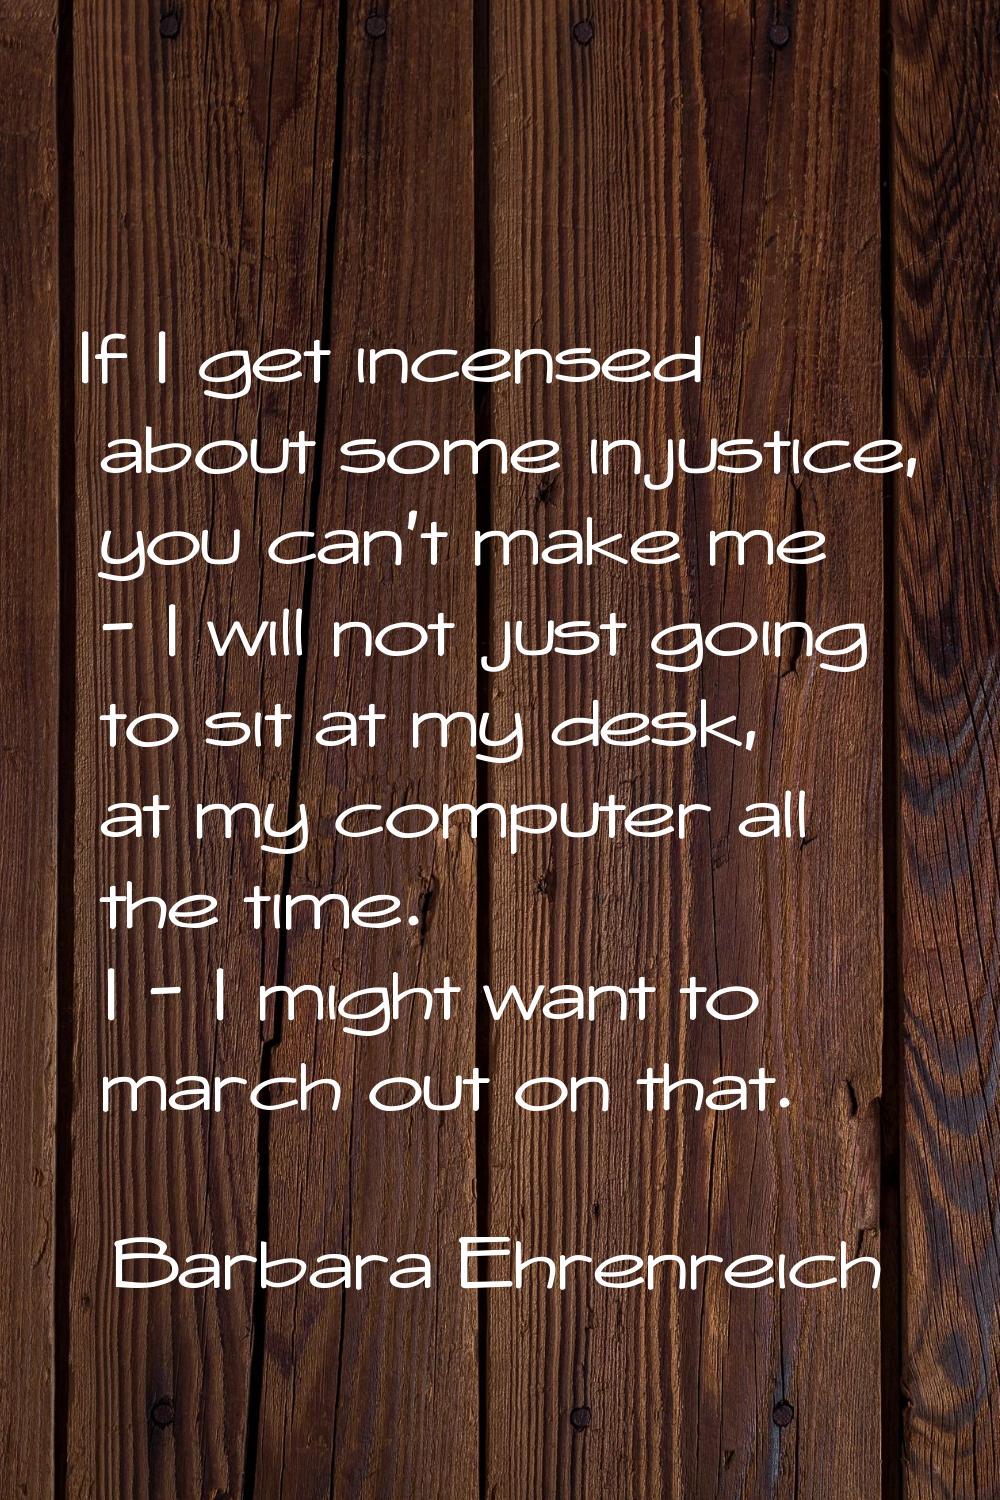 If I get incensed about some injustice, you can't make me - I will not just going to sit at my desk